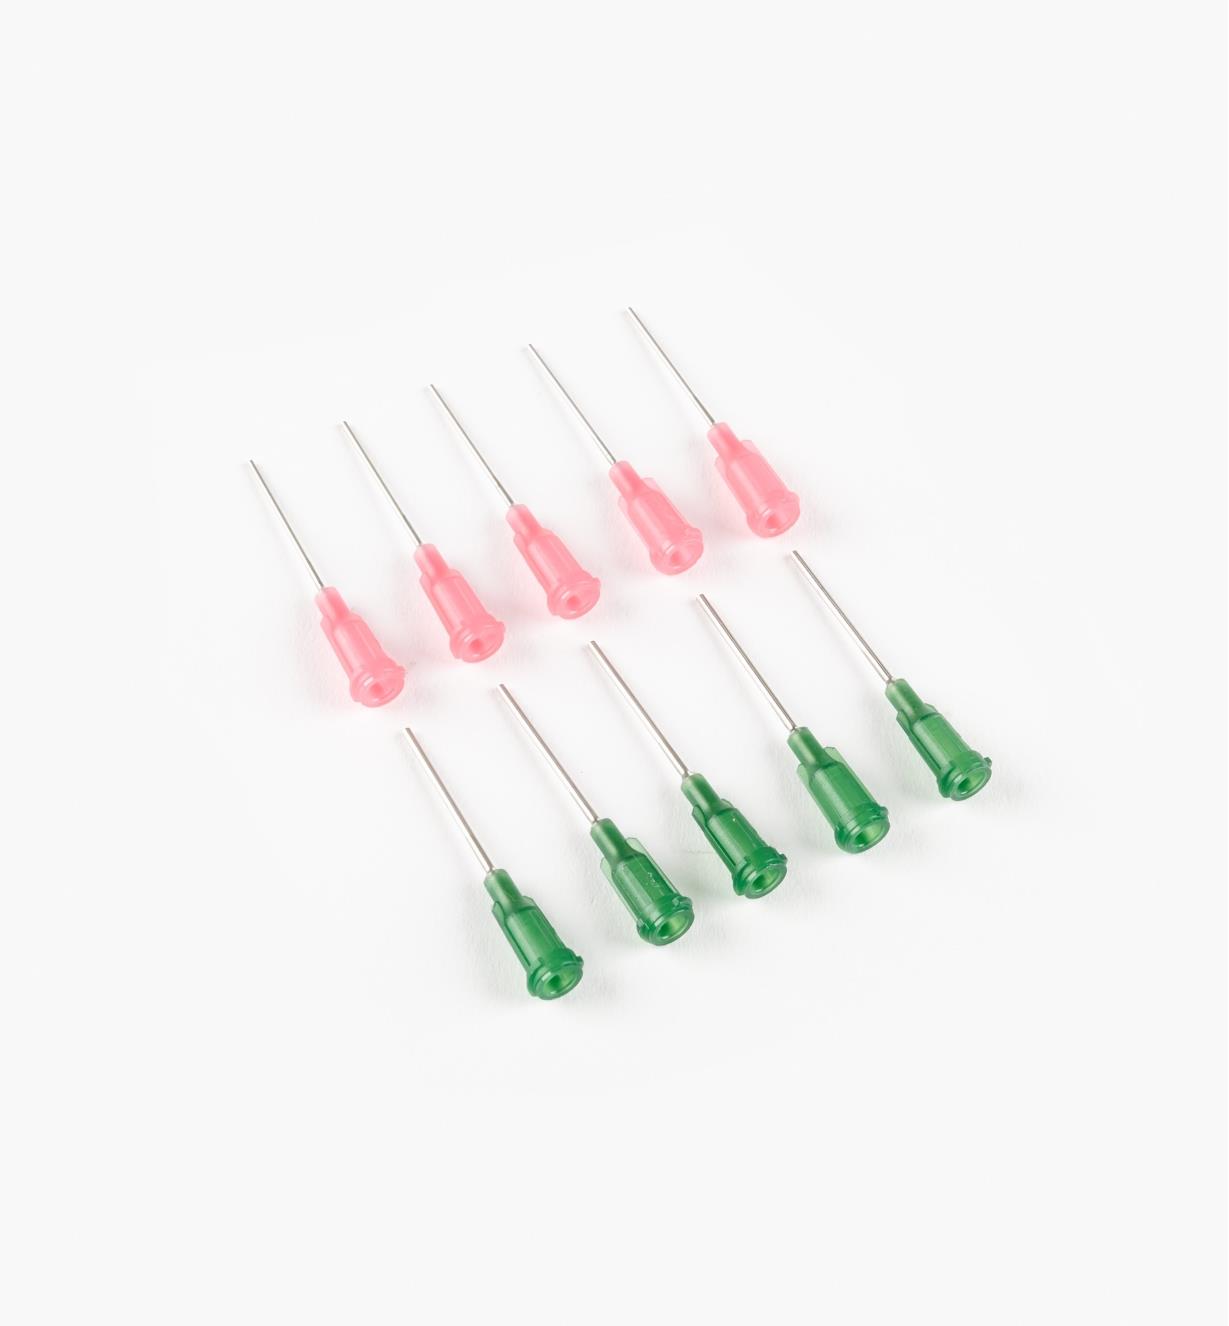 25k0737 - Replacement Set of 10 Needles